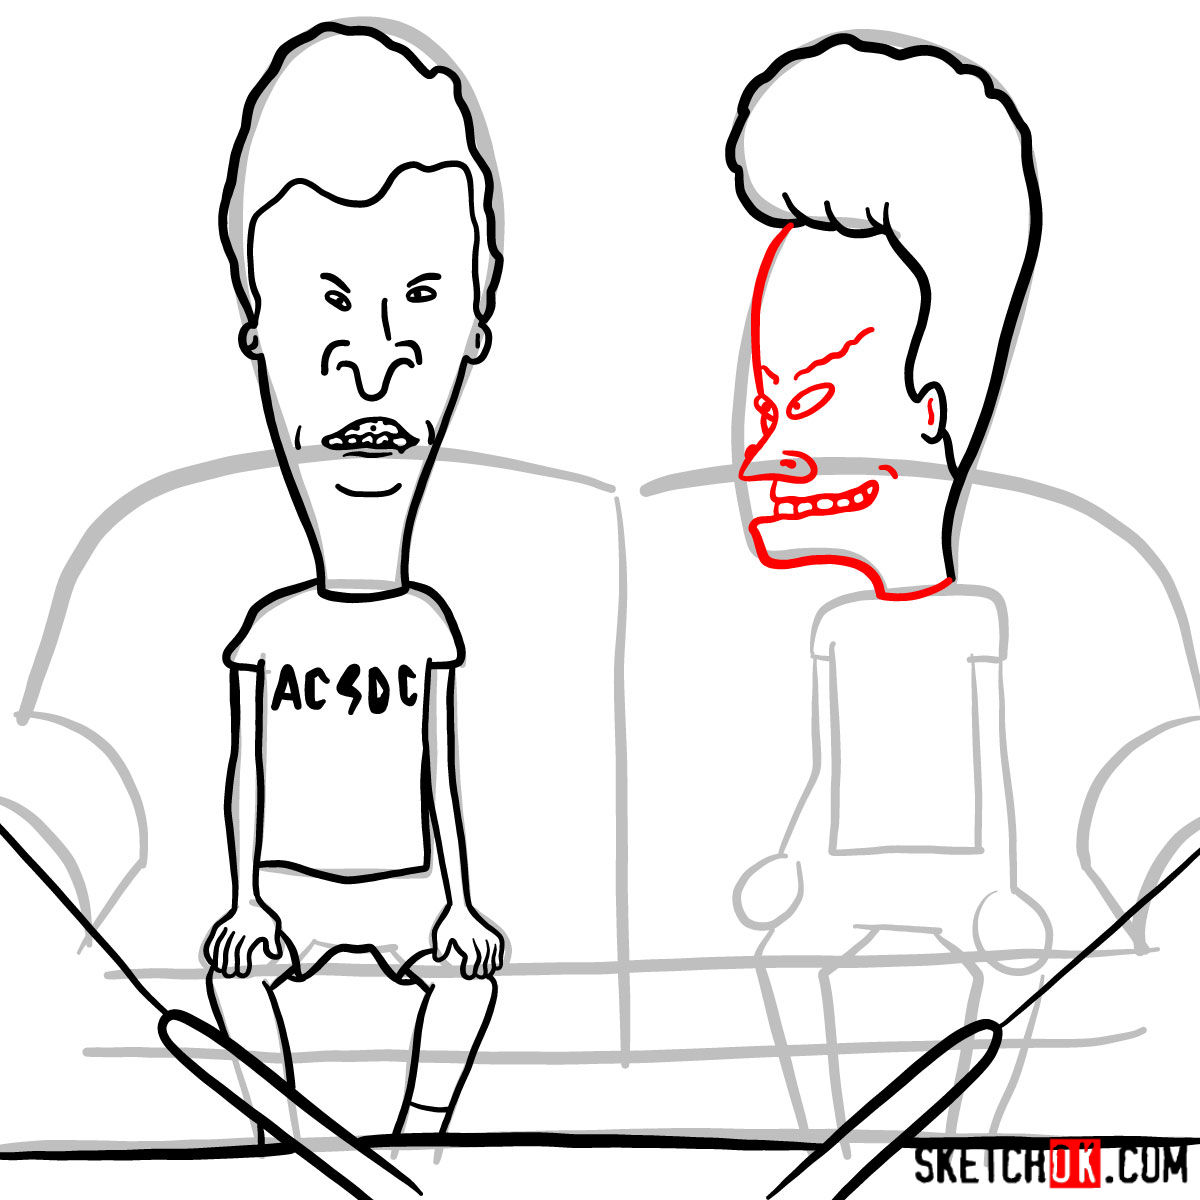 How to draw Beavis and Butt-Head - step 12